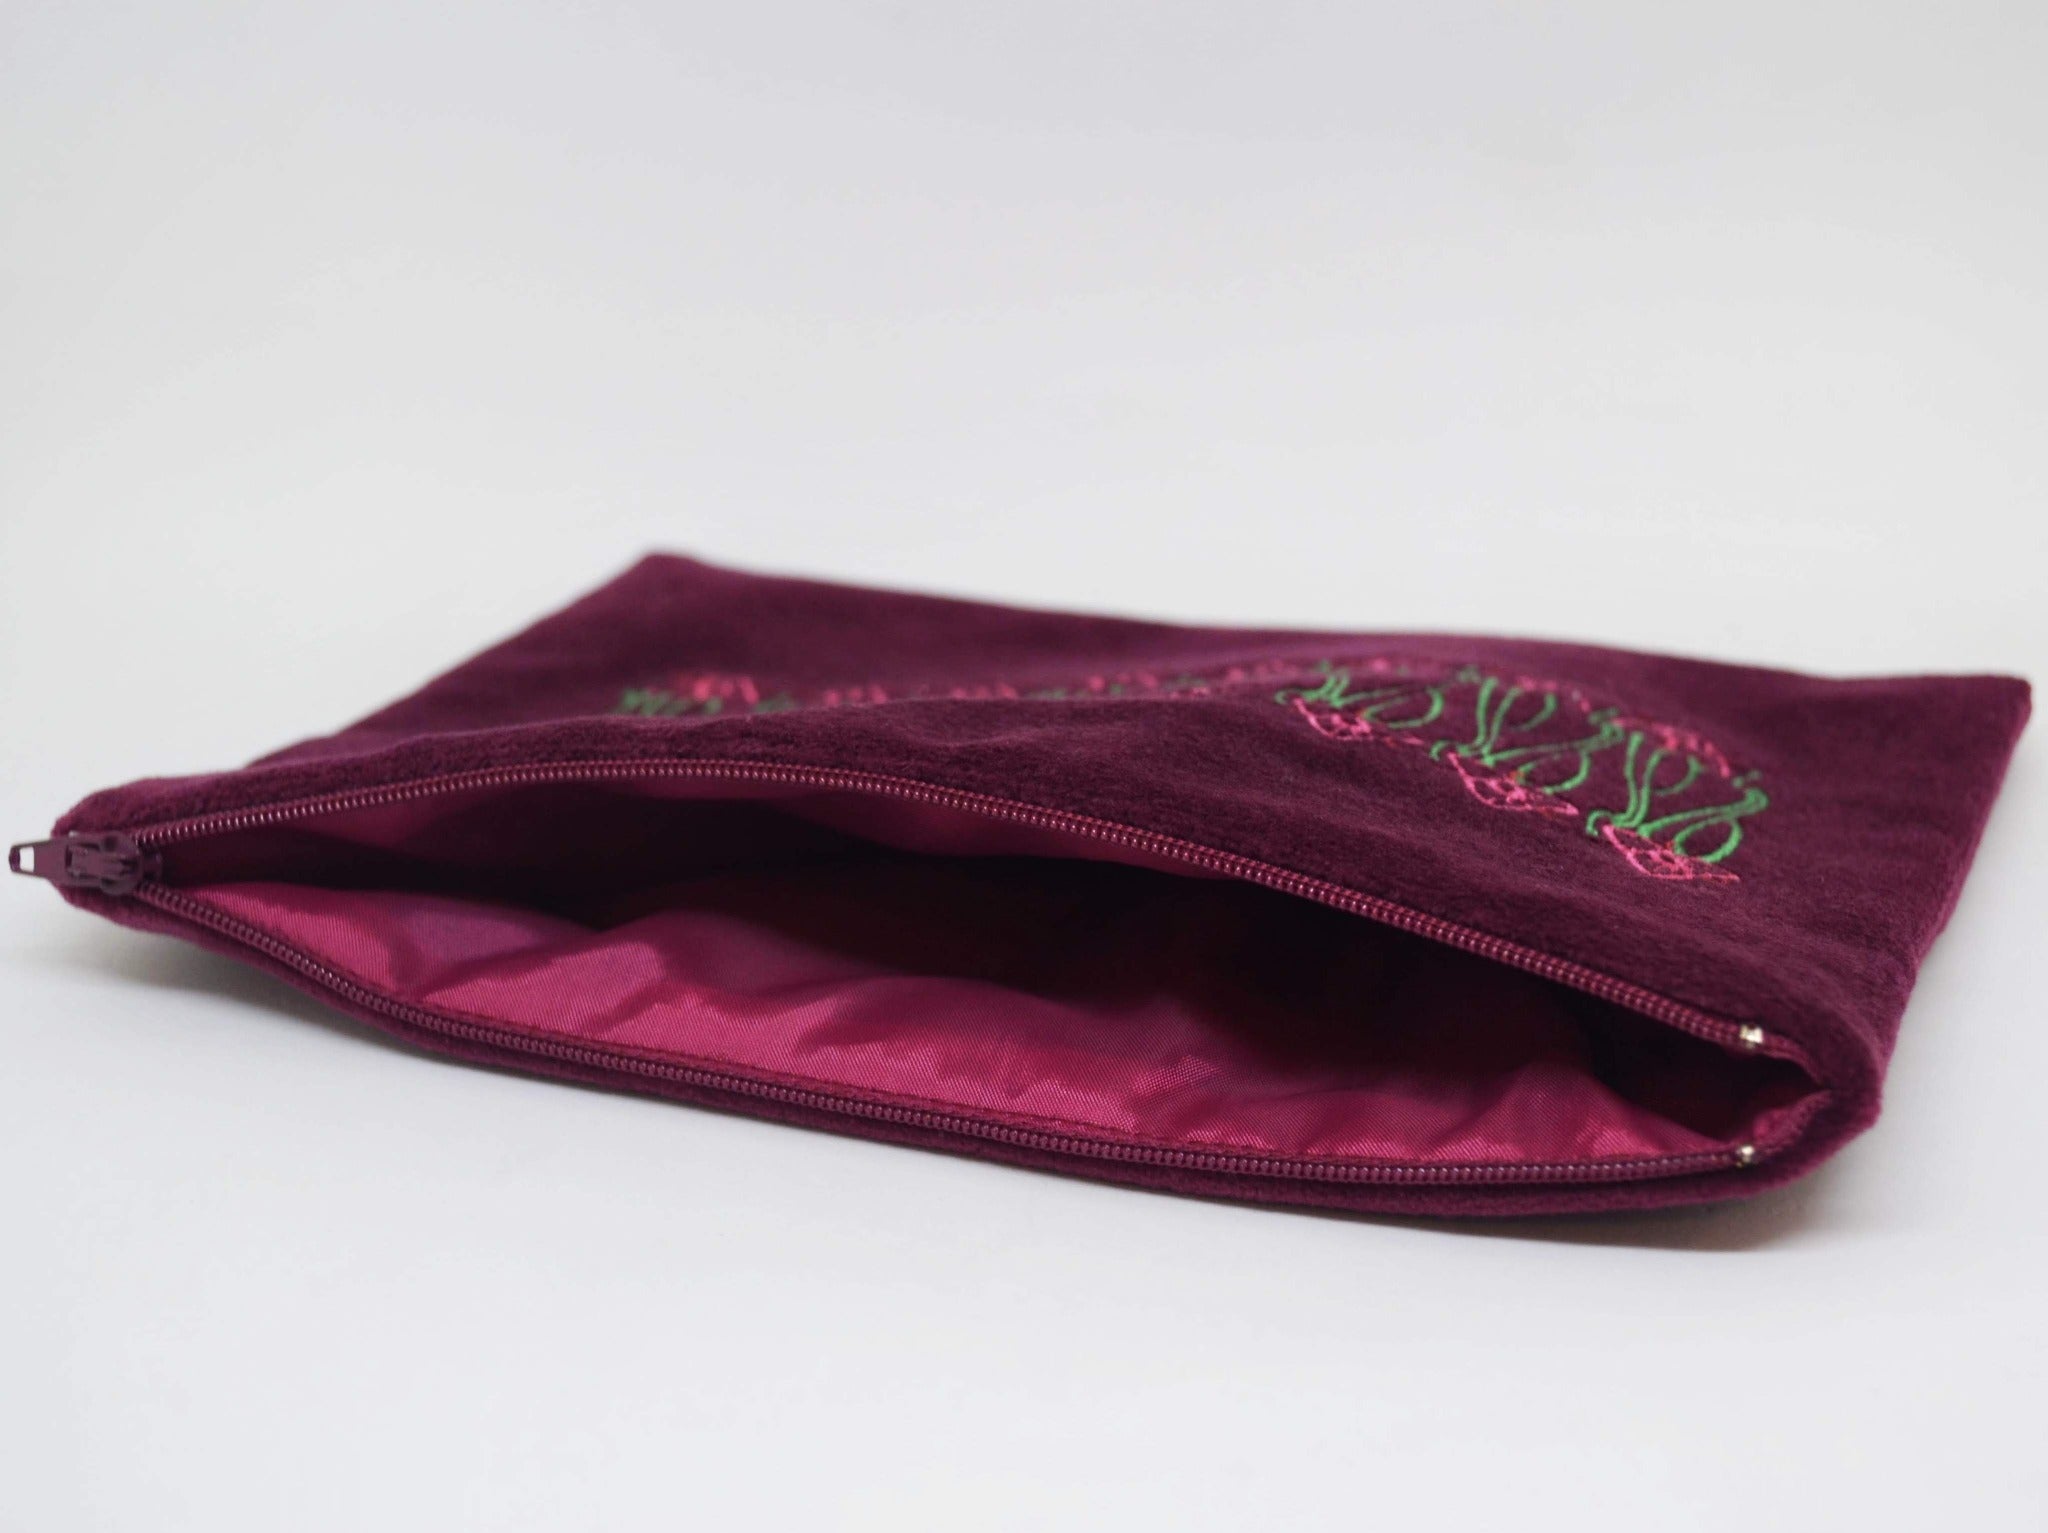 Embroidered Cosmetic Bag "Flowers"